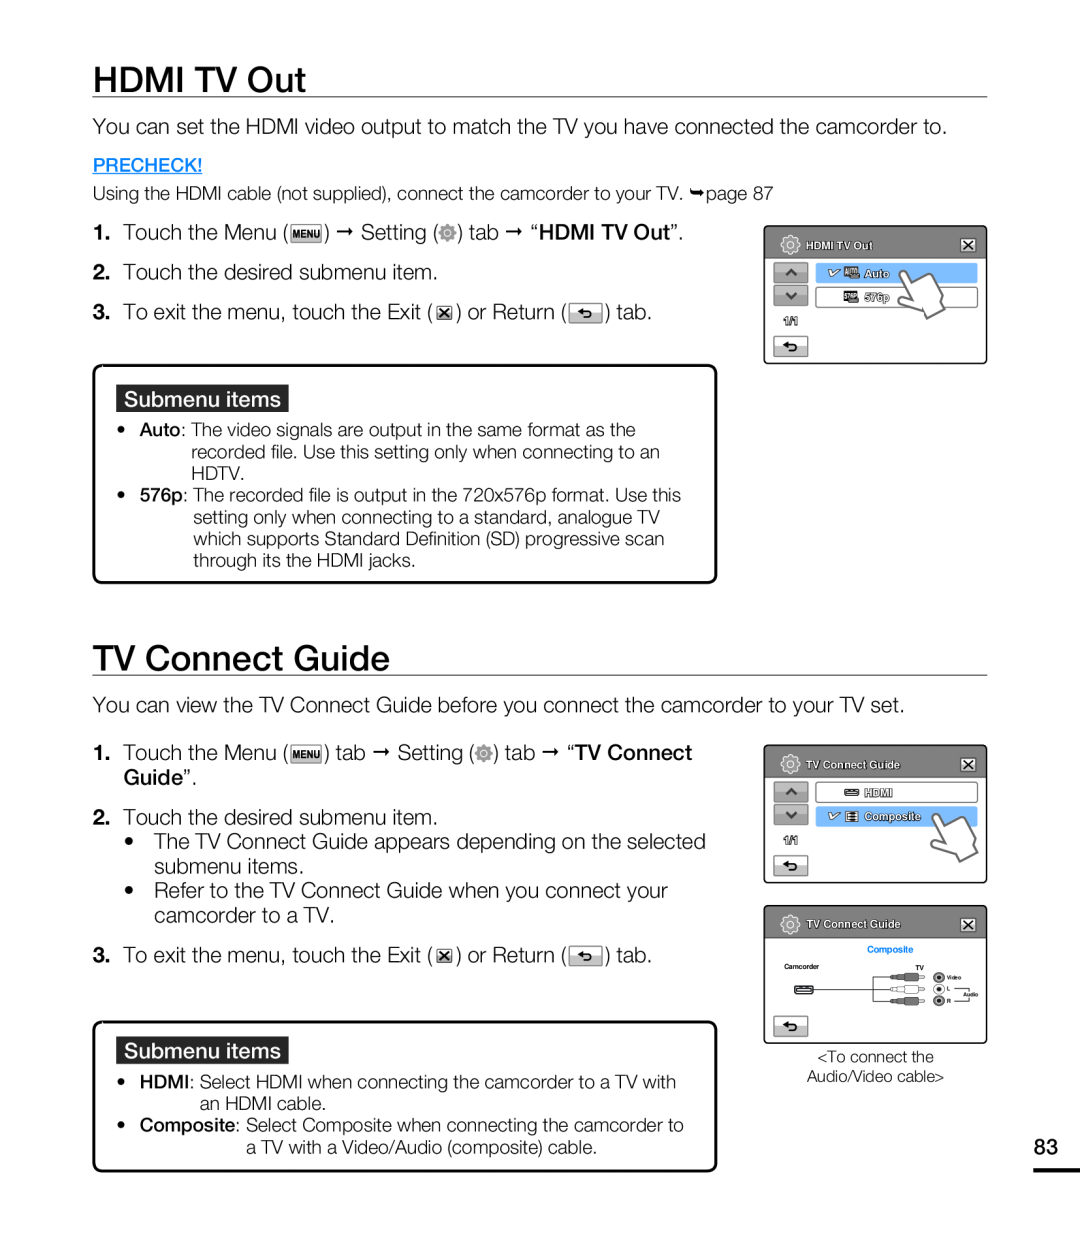 Samsung HMX-T10BP/XER, HMX-T10WP/EDC manual HDMI TV Out, TV Connect Guide, Submenu items, To connect the Audio/Video cable 